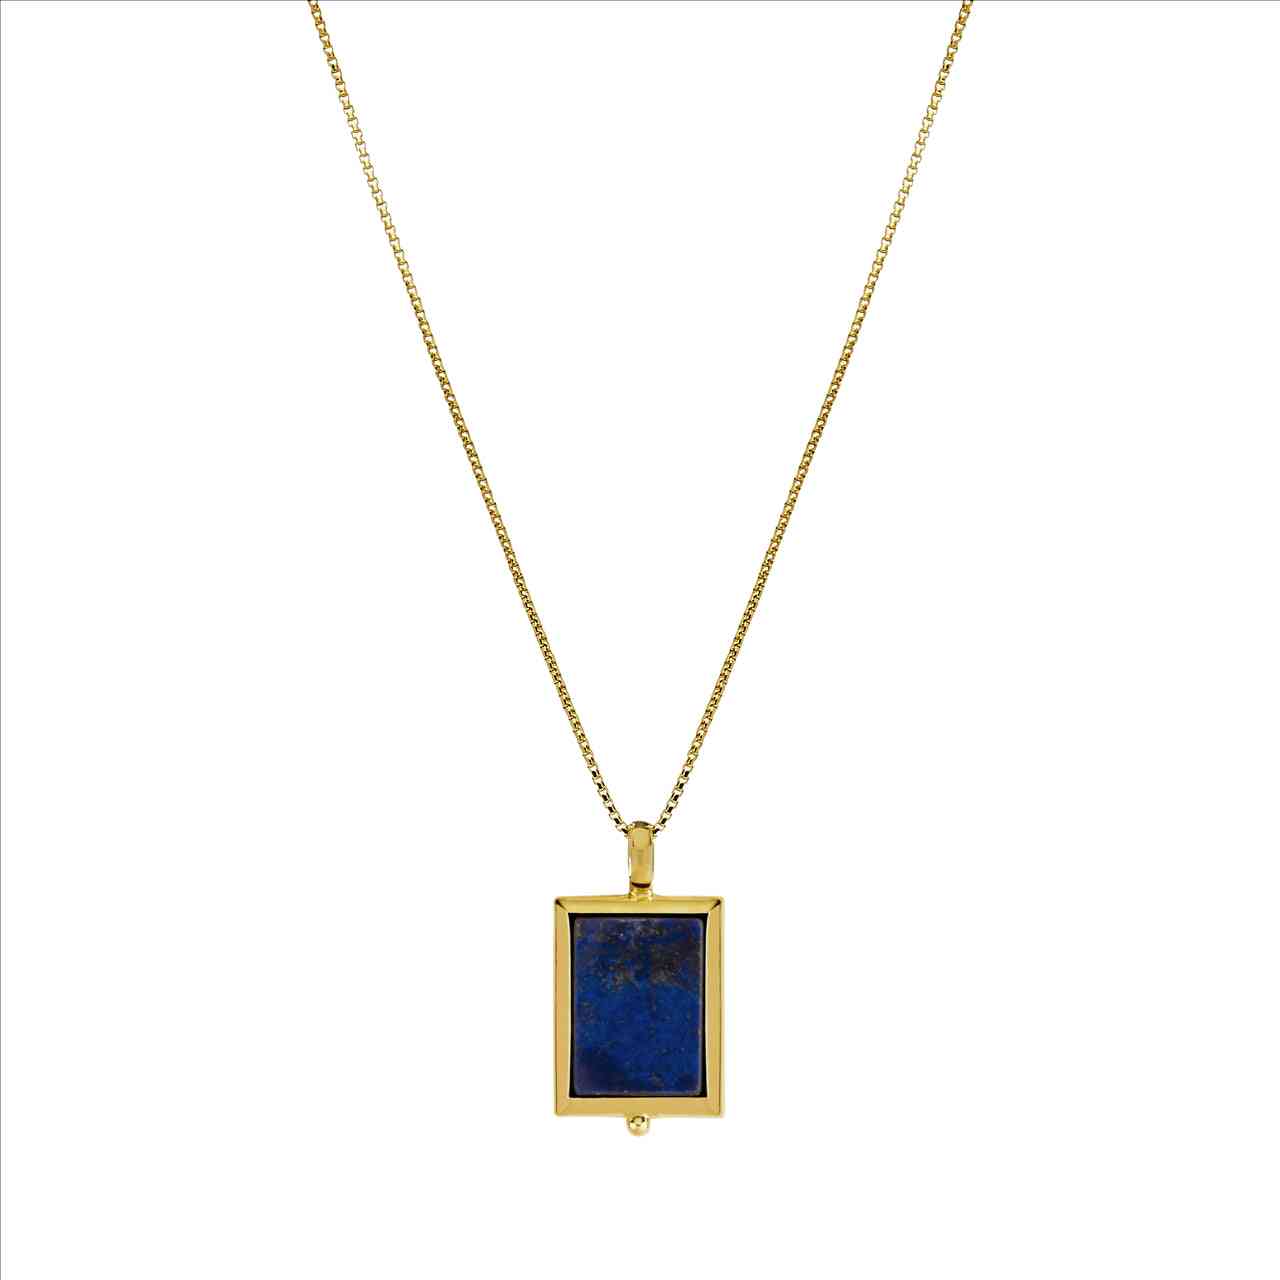 Najo Stunning Rectangular Lapis Pendant In Yellow Gold With 42Cm+5Cm Ext, Chain.